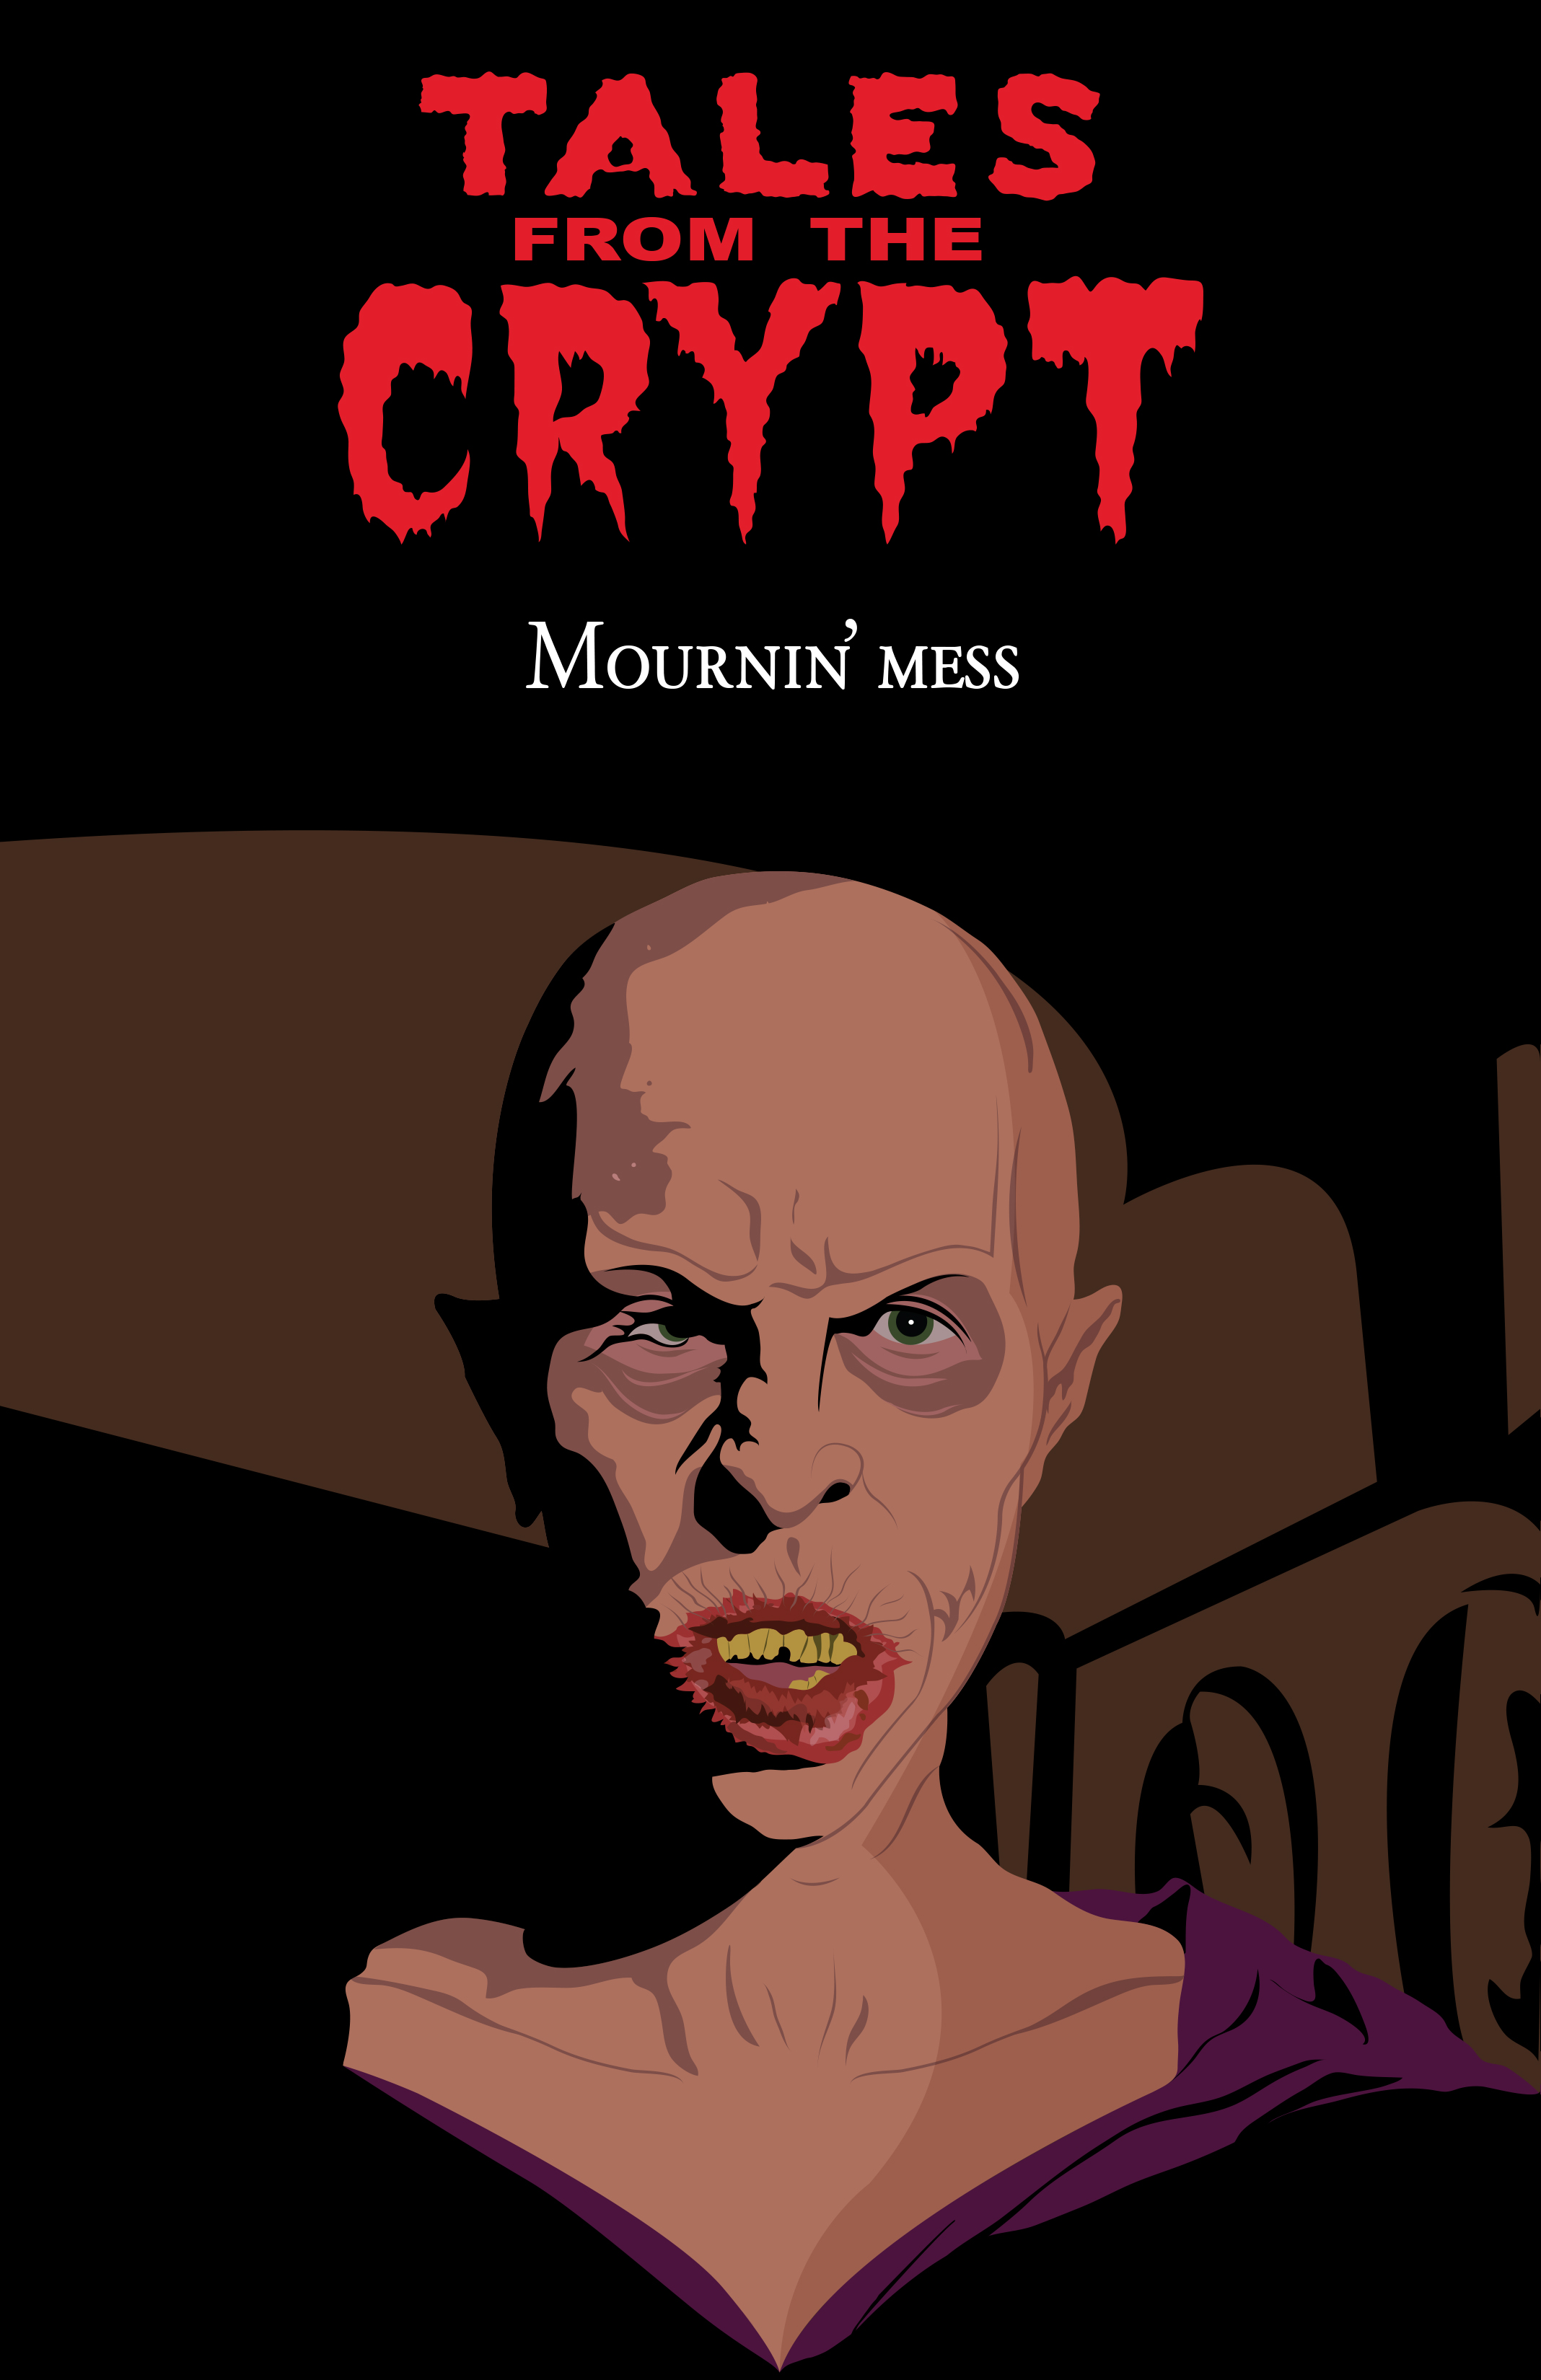 Tales from the Crypt: Mournin' Mess